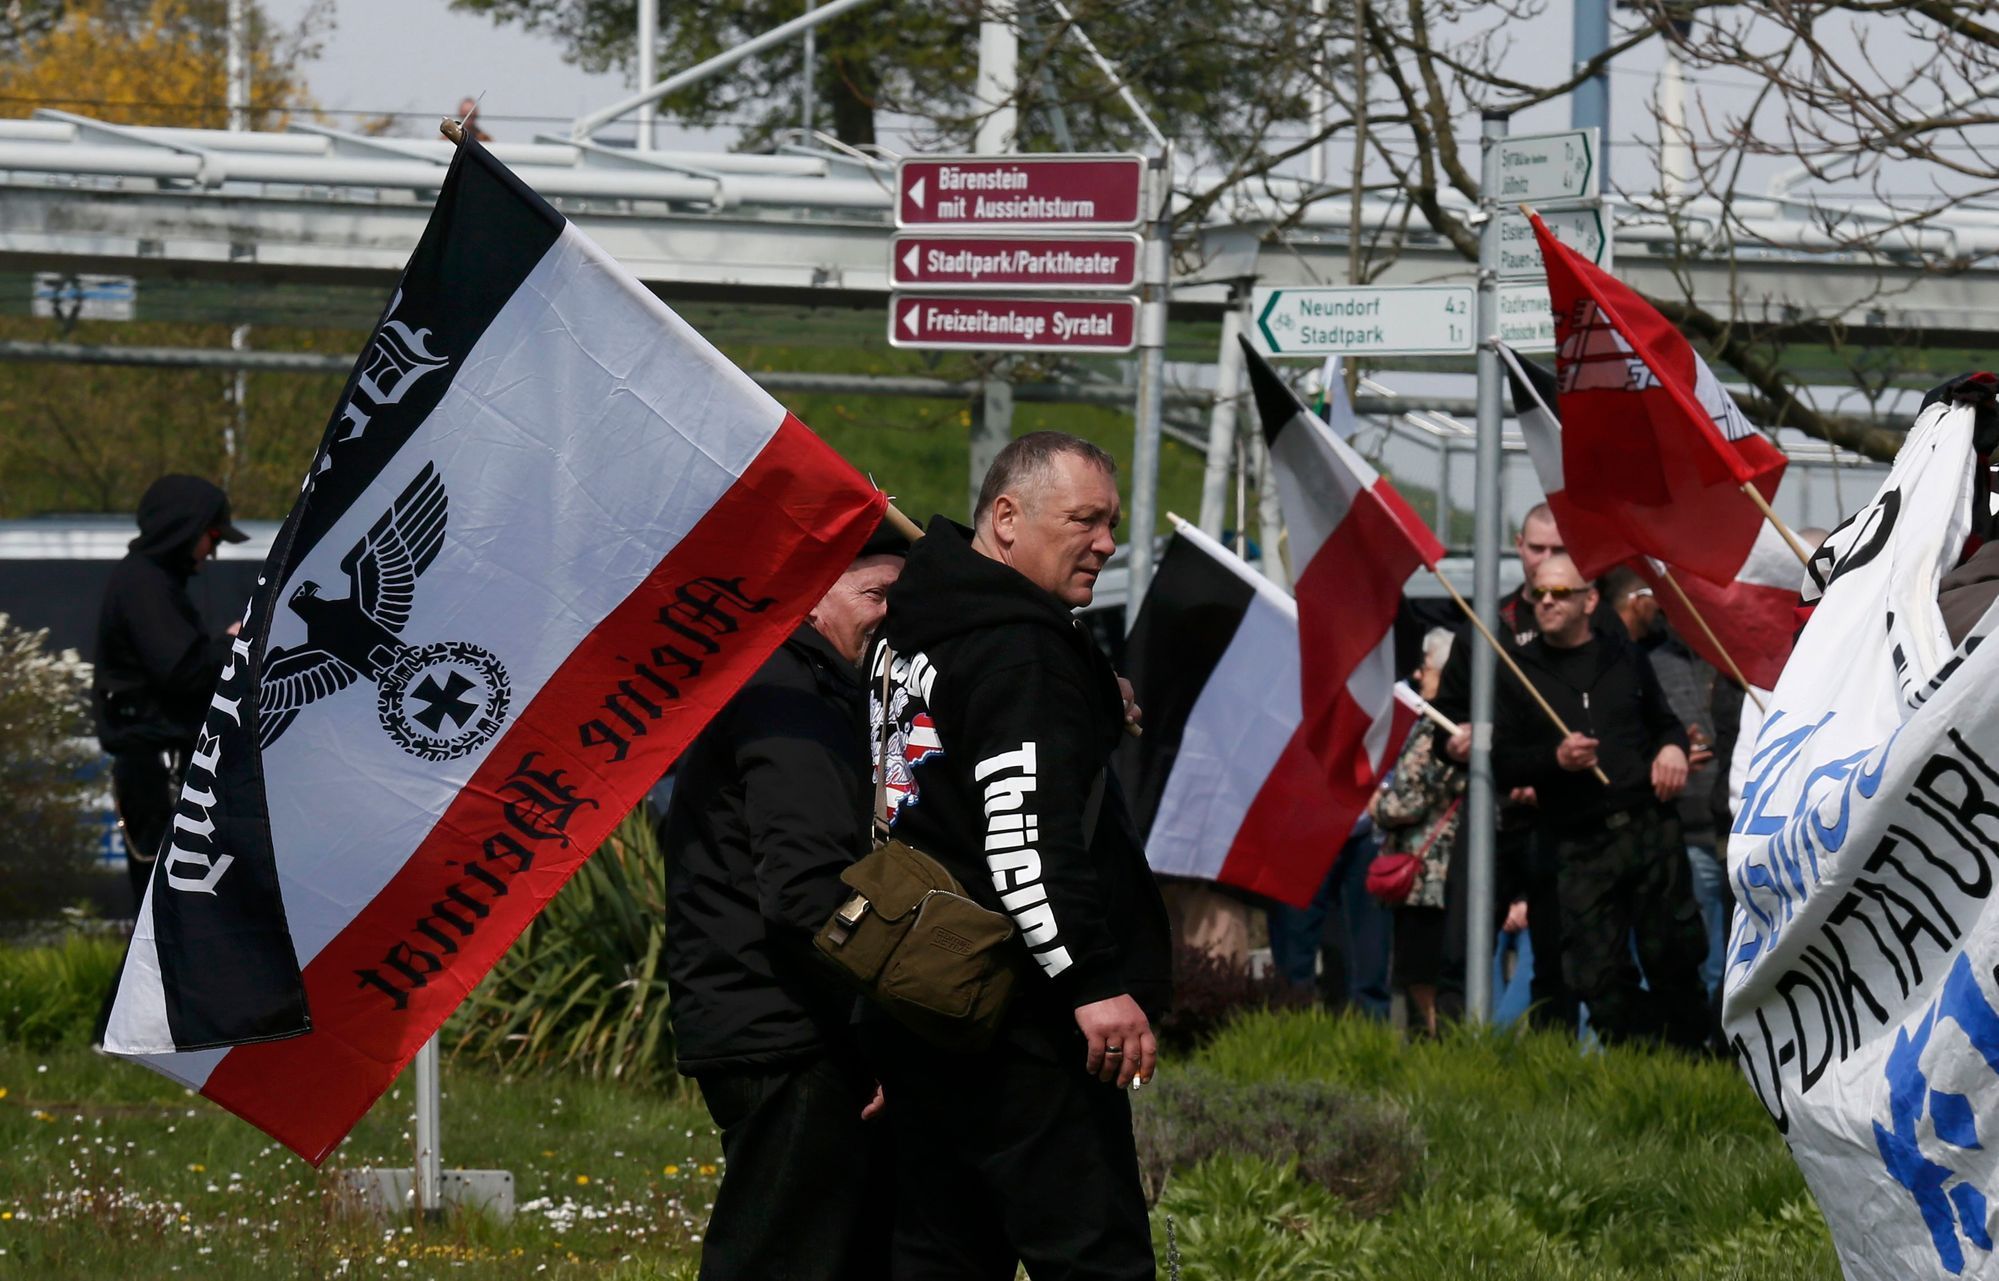 Right-wing protestors gather for a demonstration in the town of Plauen